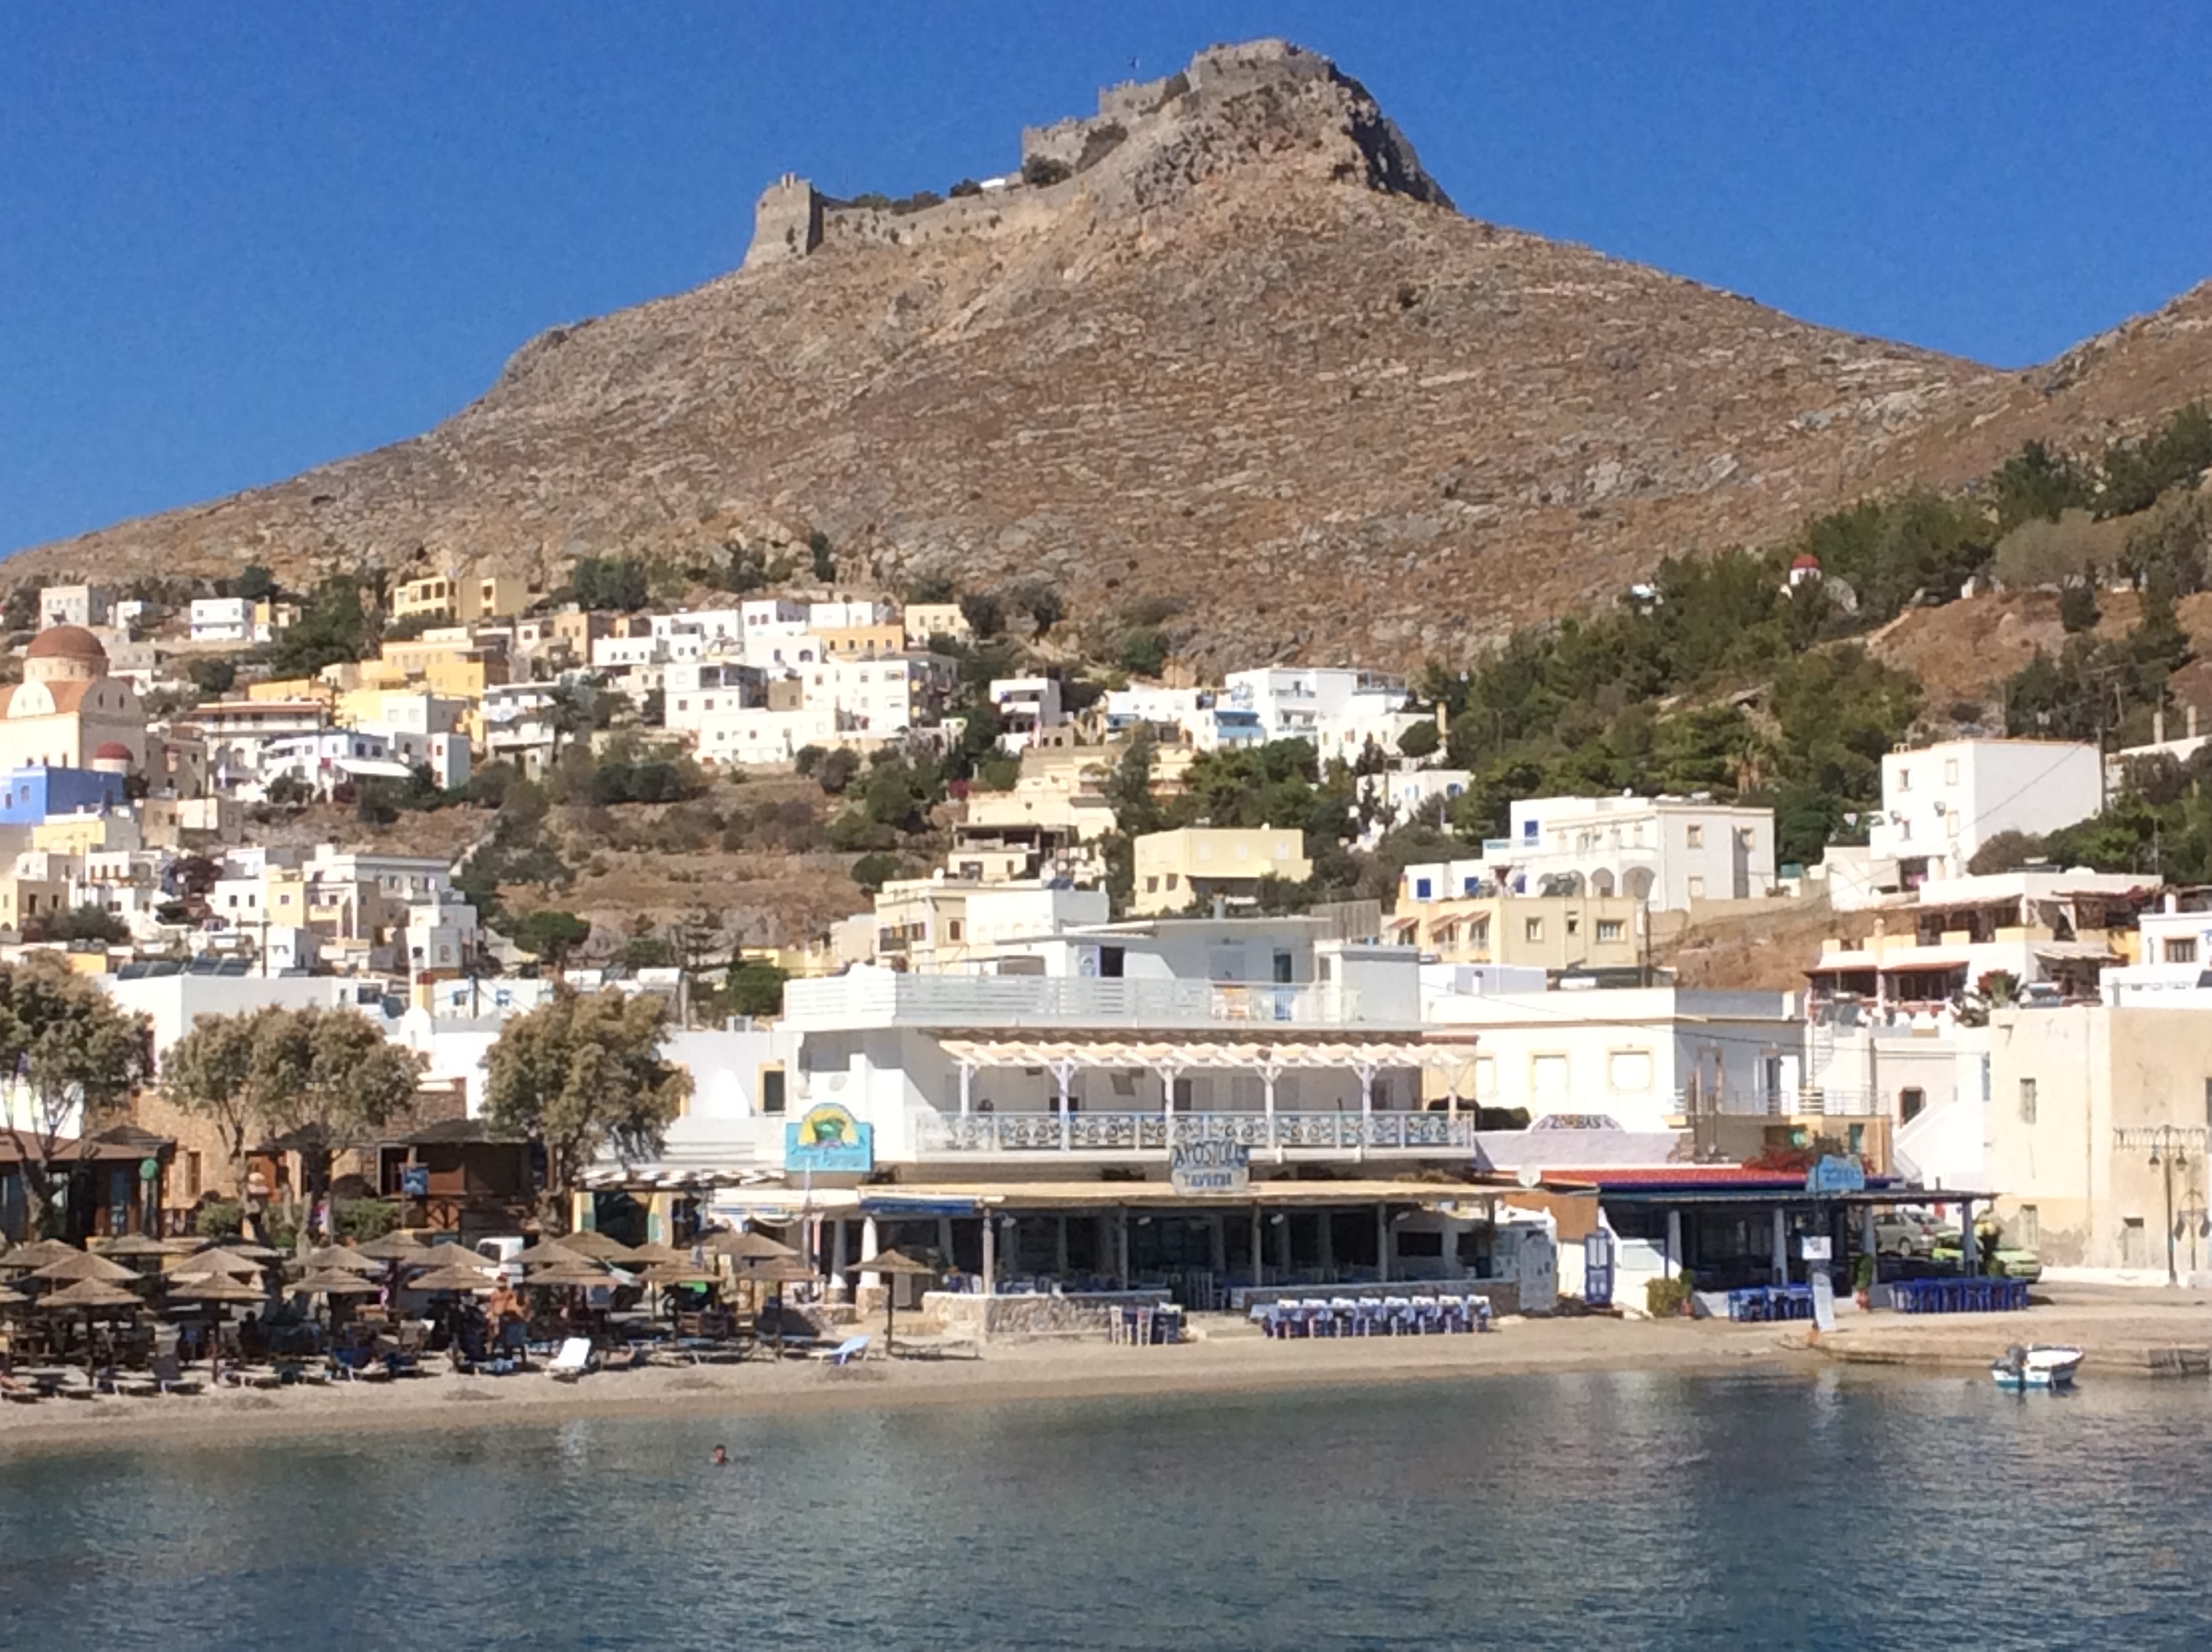 View of Leros with Pandeli Castle in the background